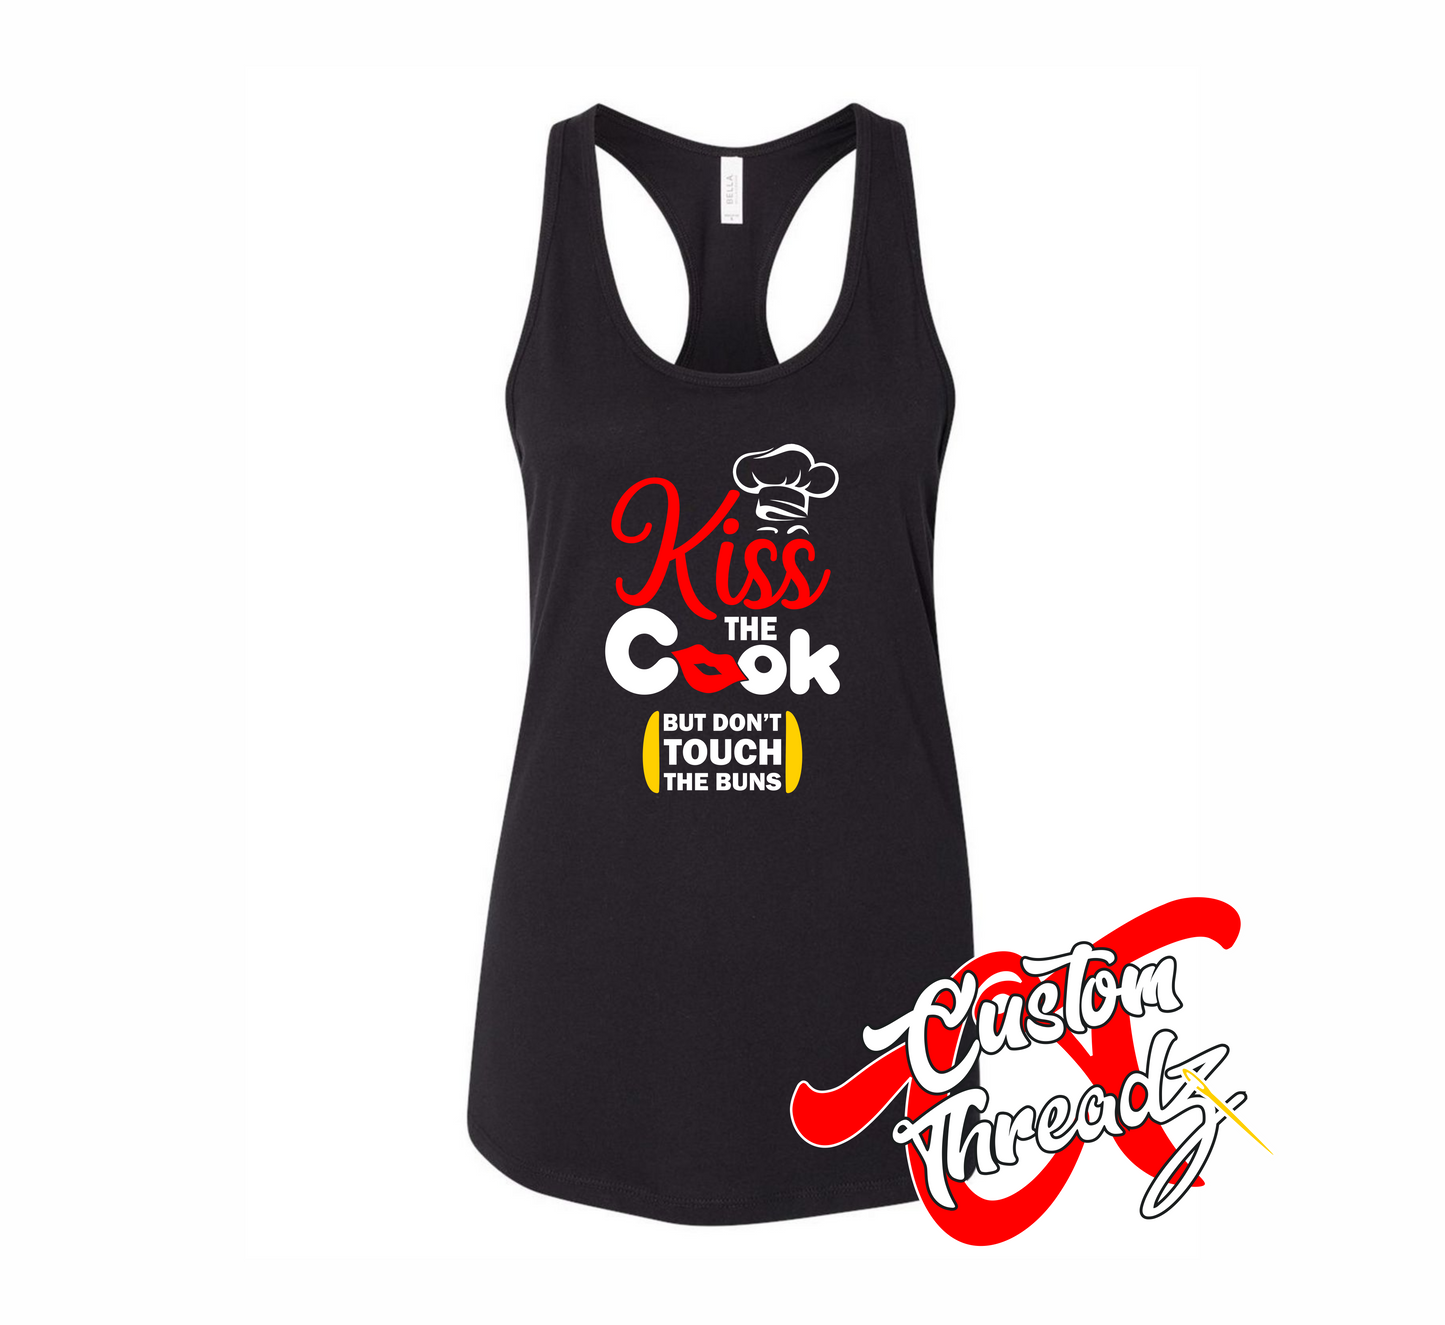 womens black tank top with kiss the cook but dont touch the buns DTG printed design